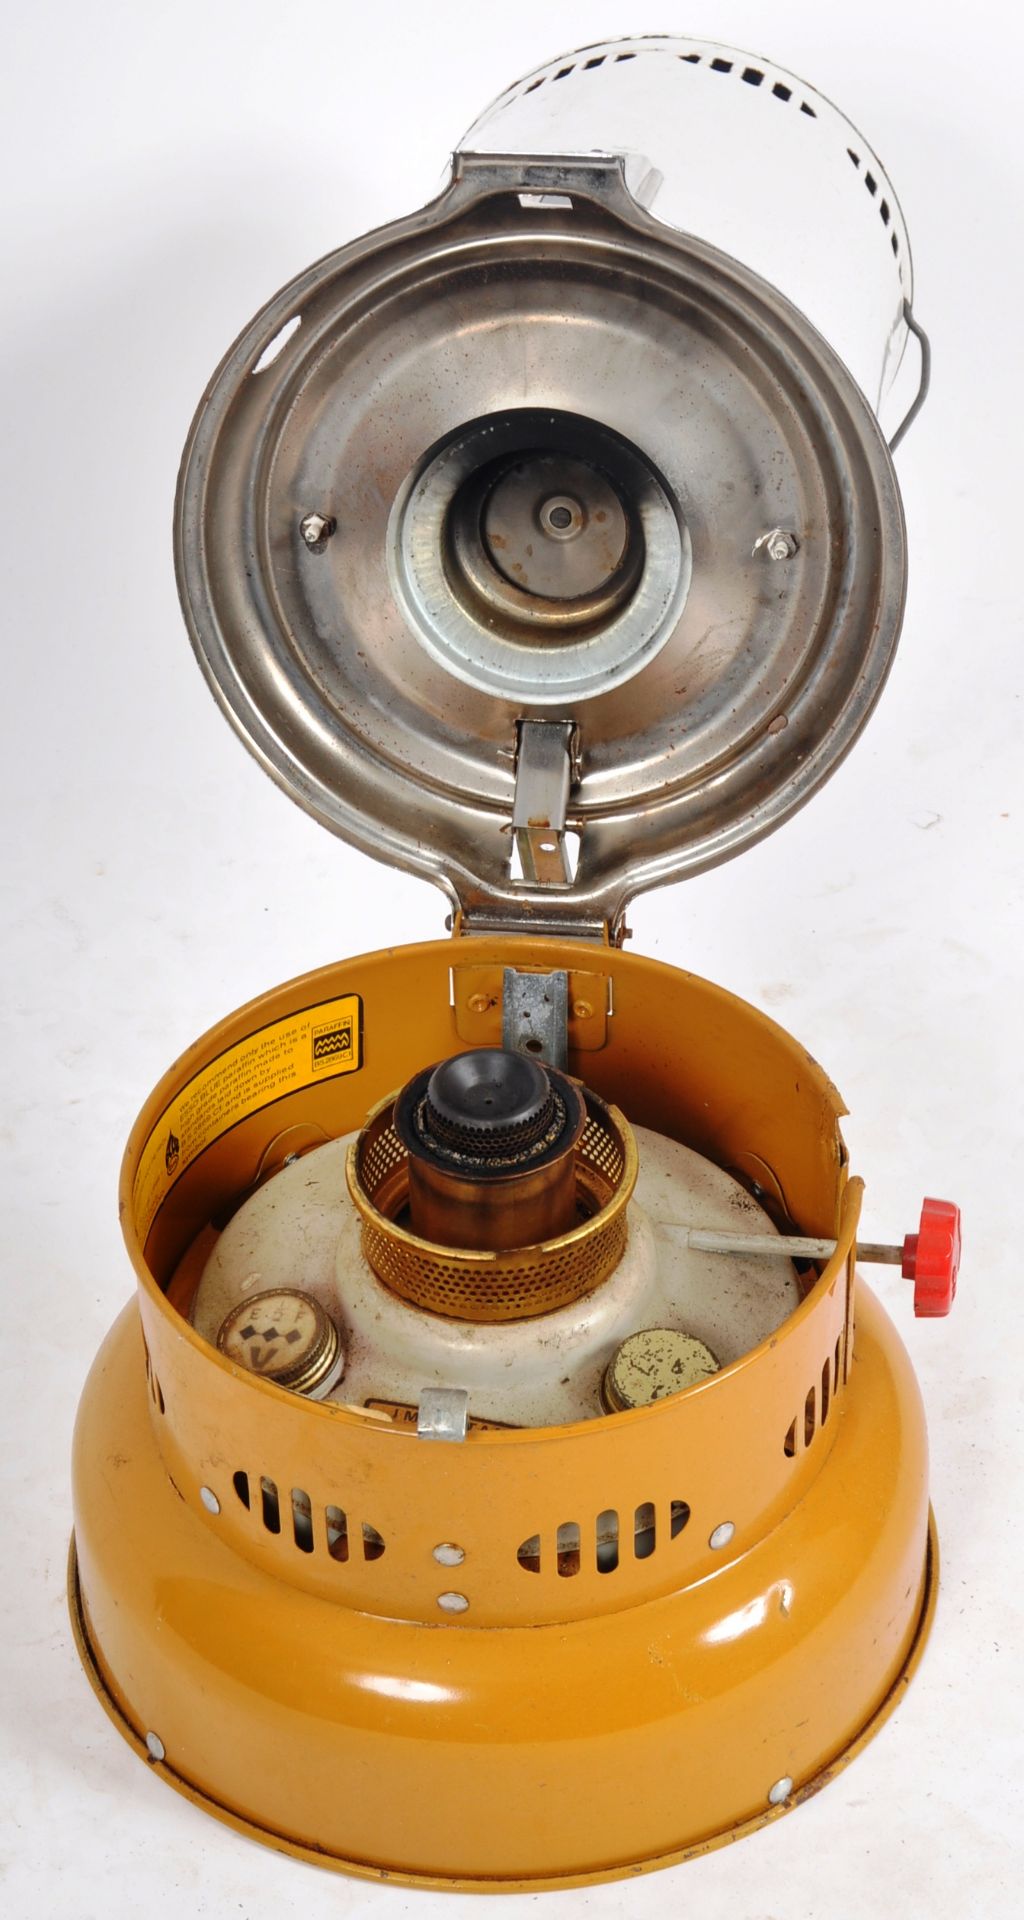 VALOR - MID CENTURY TWO TONE ENAMELED PARAFFIN HEATER - Image 6 of 7